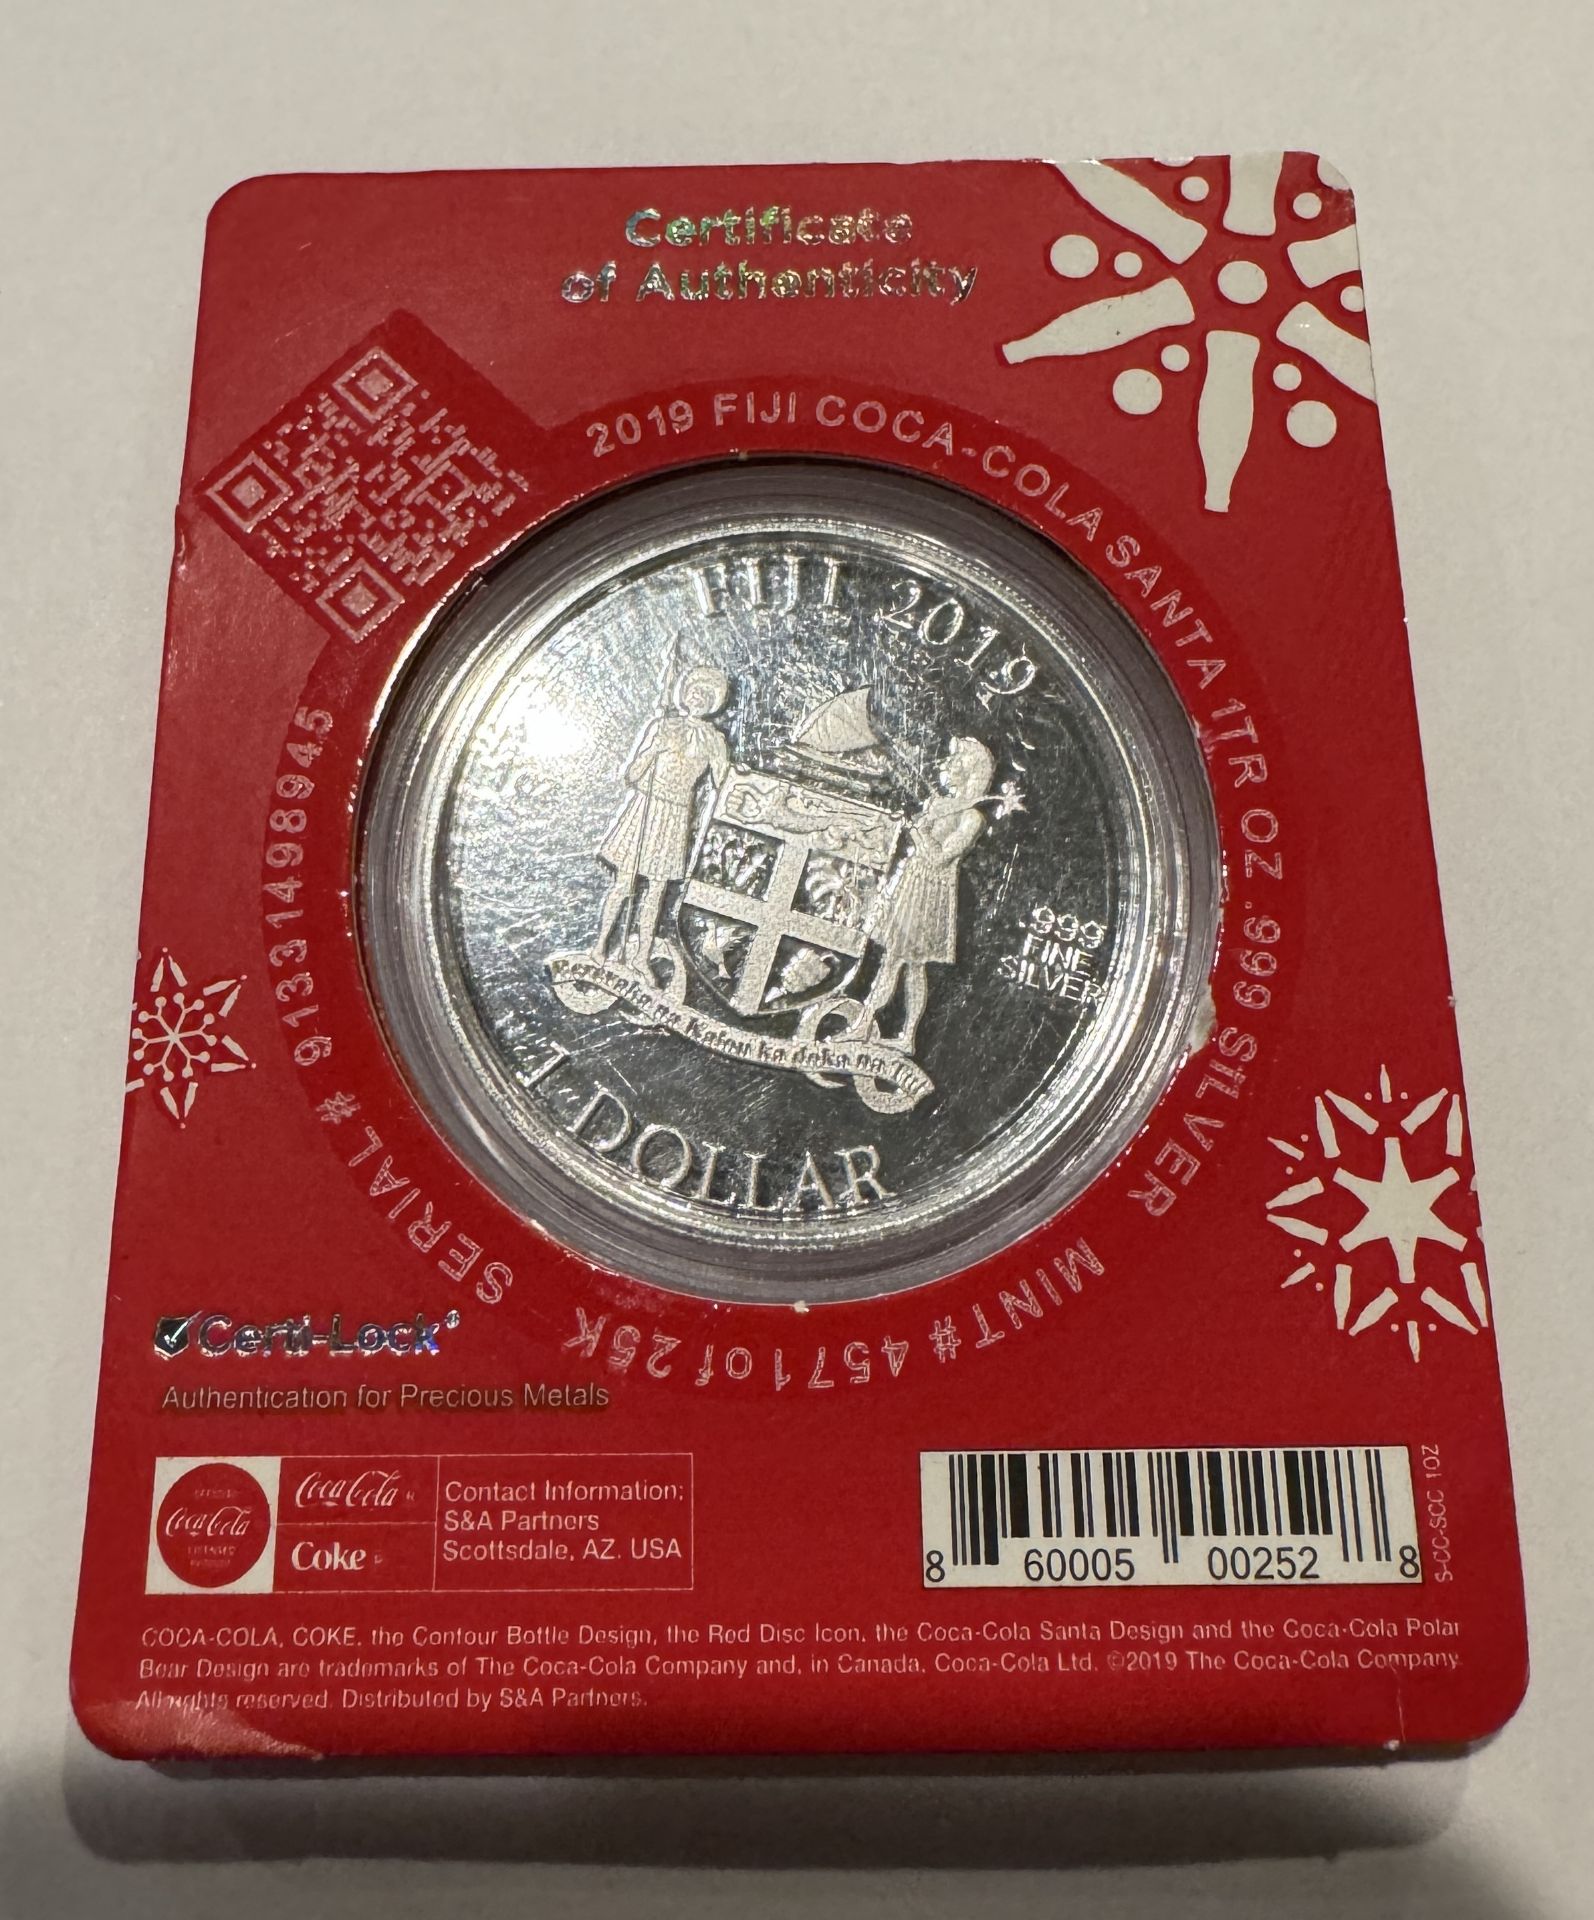 COCA-COLA 2019 RESERVE BANK OF FIJI HOLIDAY COIN 1OZ .999 SILVER - Image 2 of 2